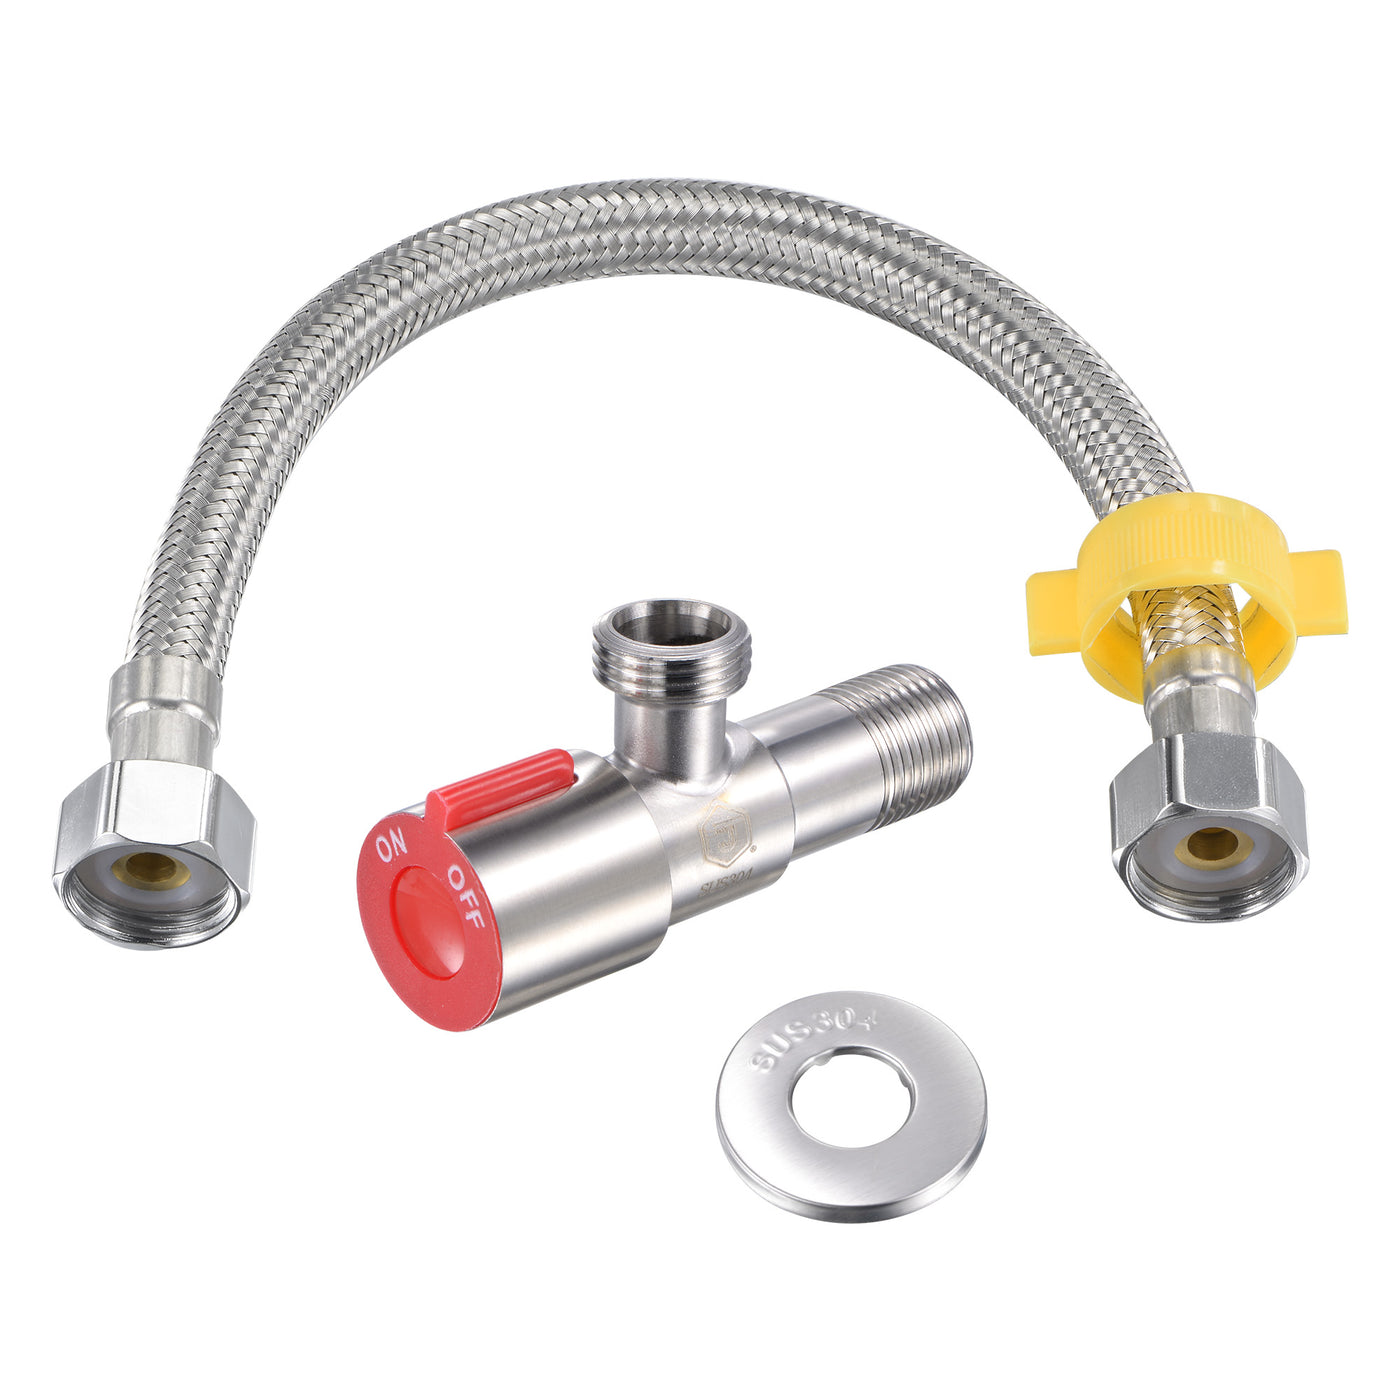 Uxcell Uxcell Angle Valve Water Stop Valve G1/2 Male Thread 2 Ways 304 Stainless Steel Red with Ornament Cover and Faucet Supply Line